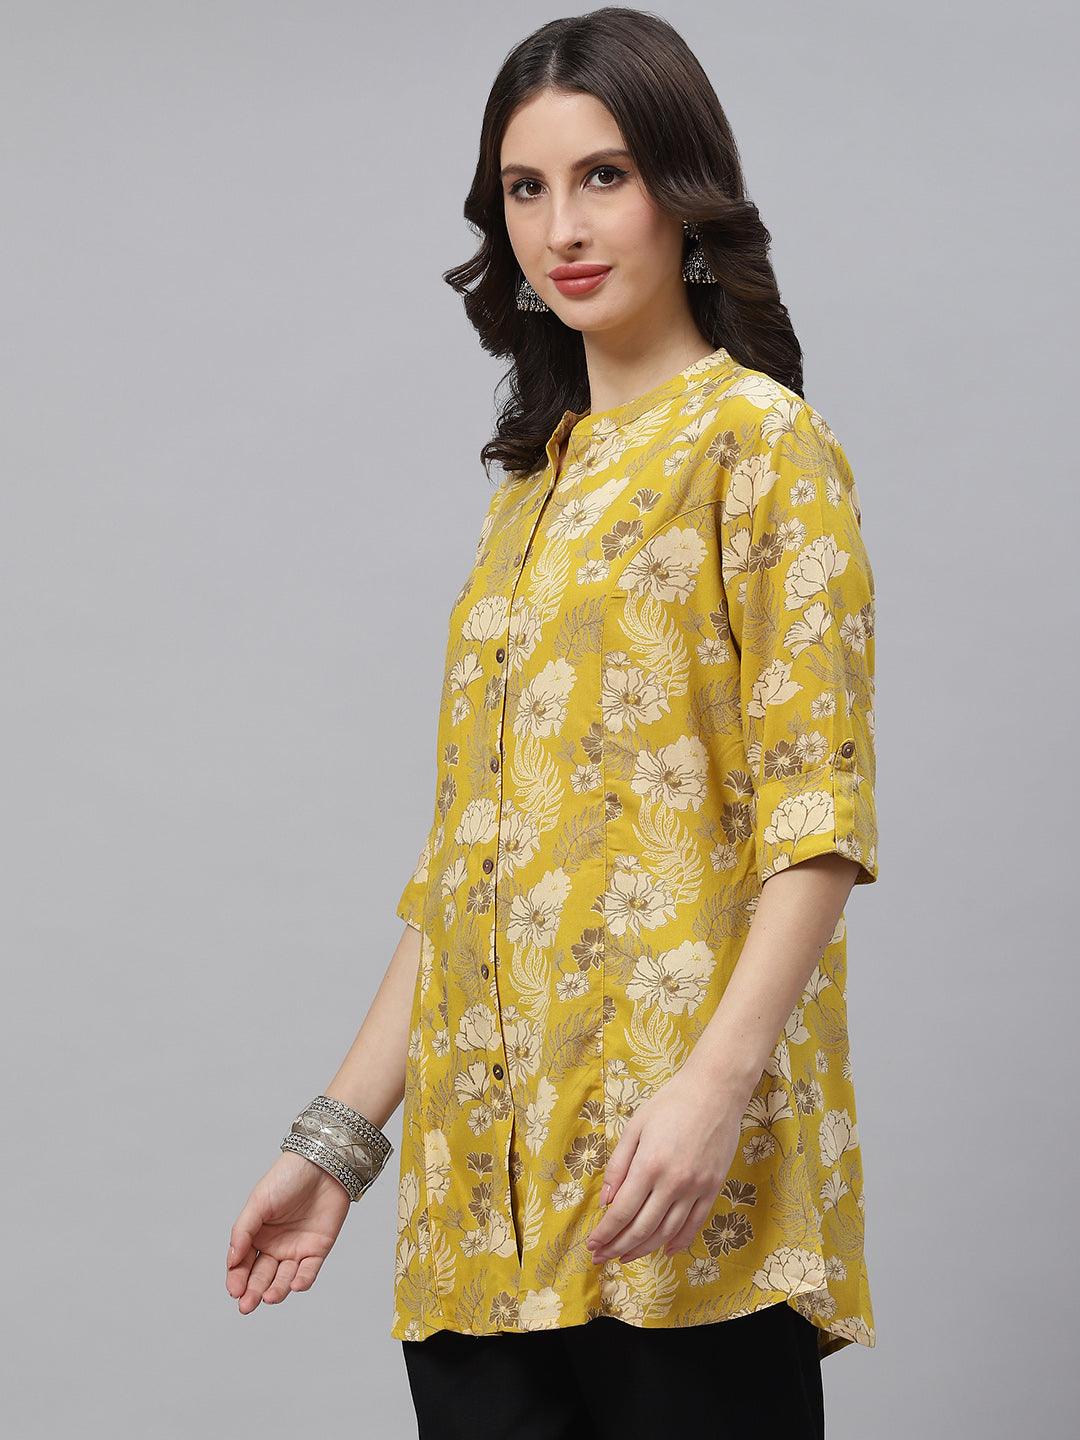 Printed Cotton Kurti In Chennai (Madras) - Prices, Manufacturers & Suppliers